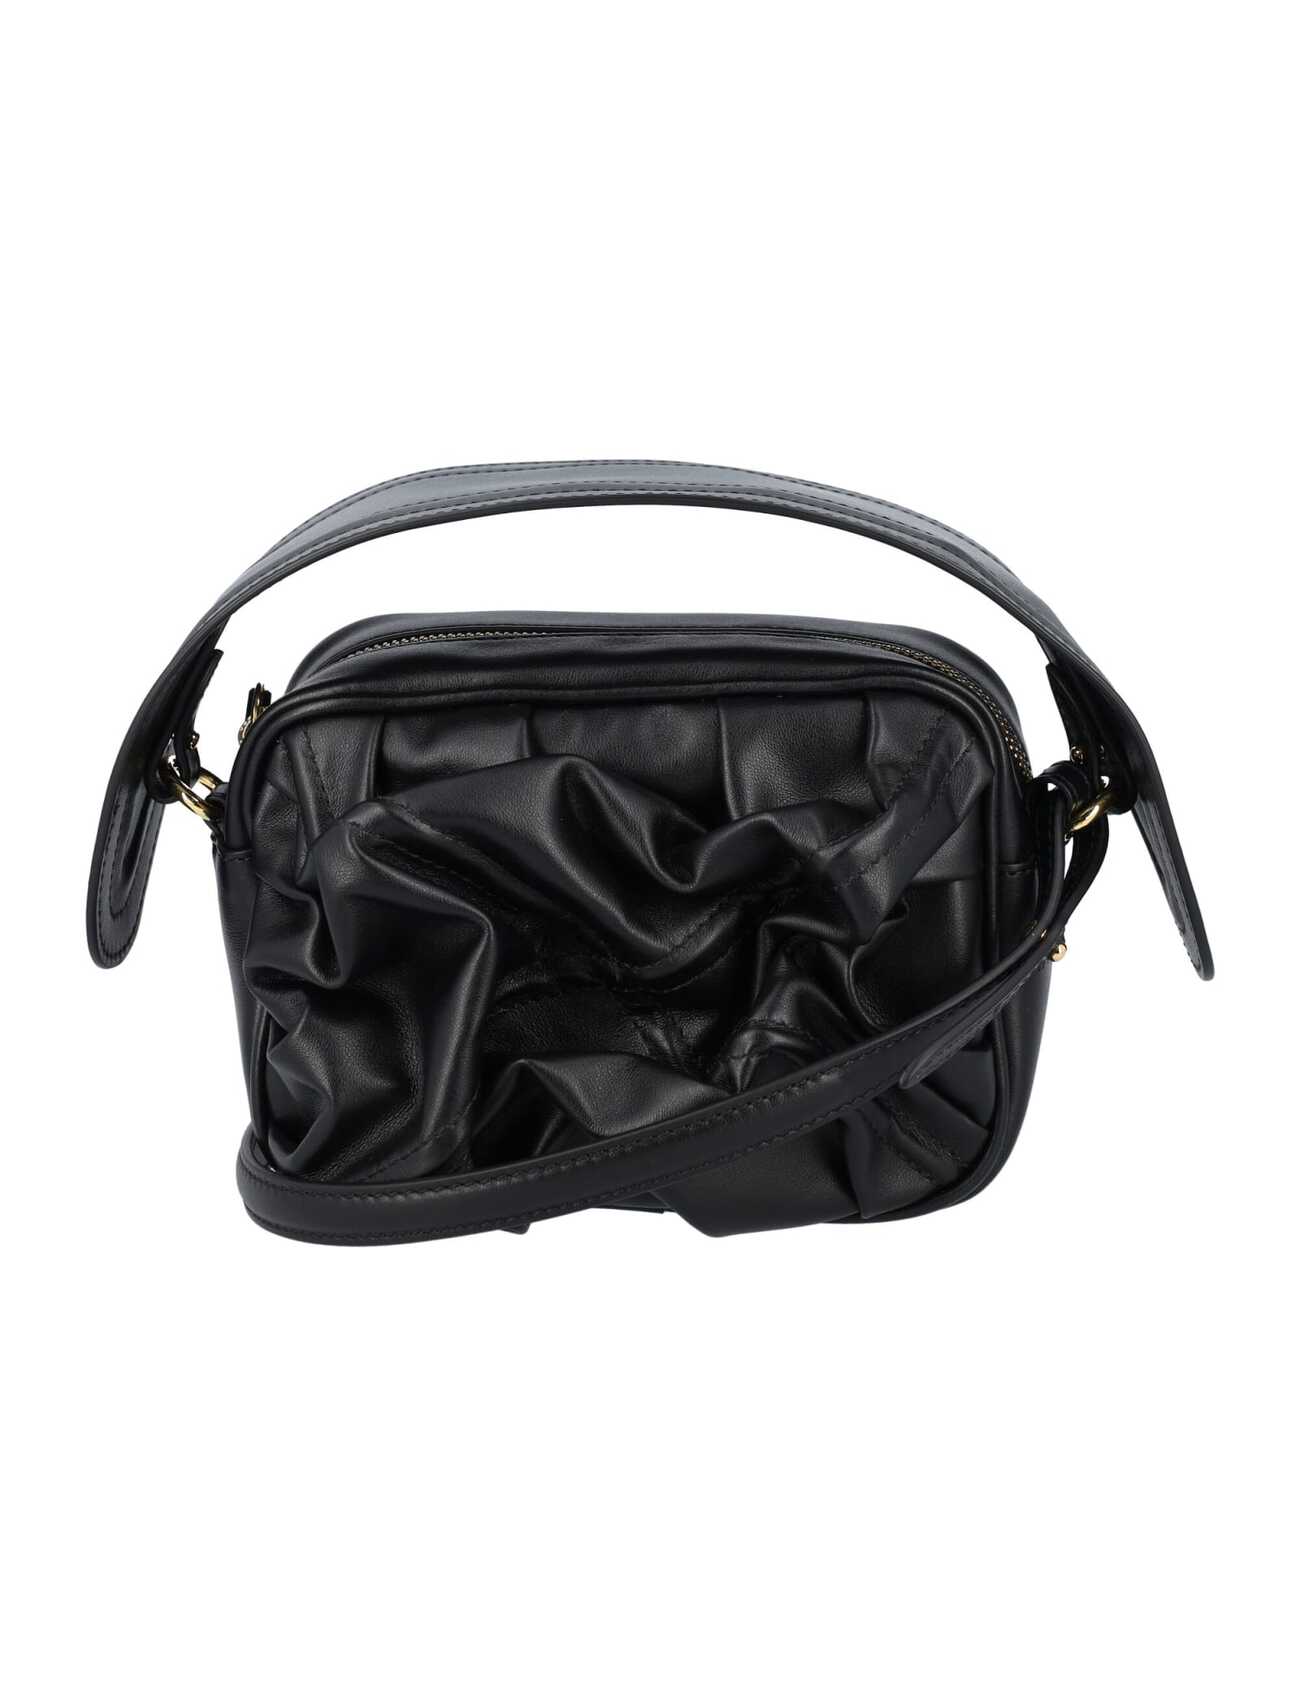 Y/Project Wire Box Bag in black